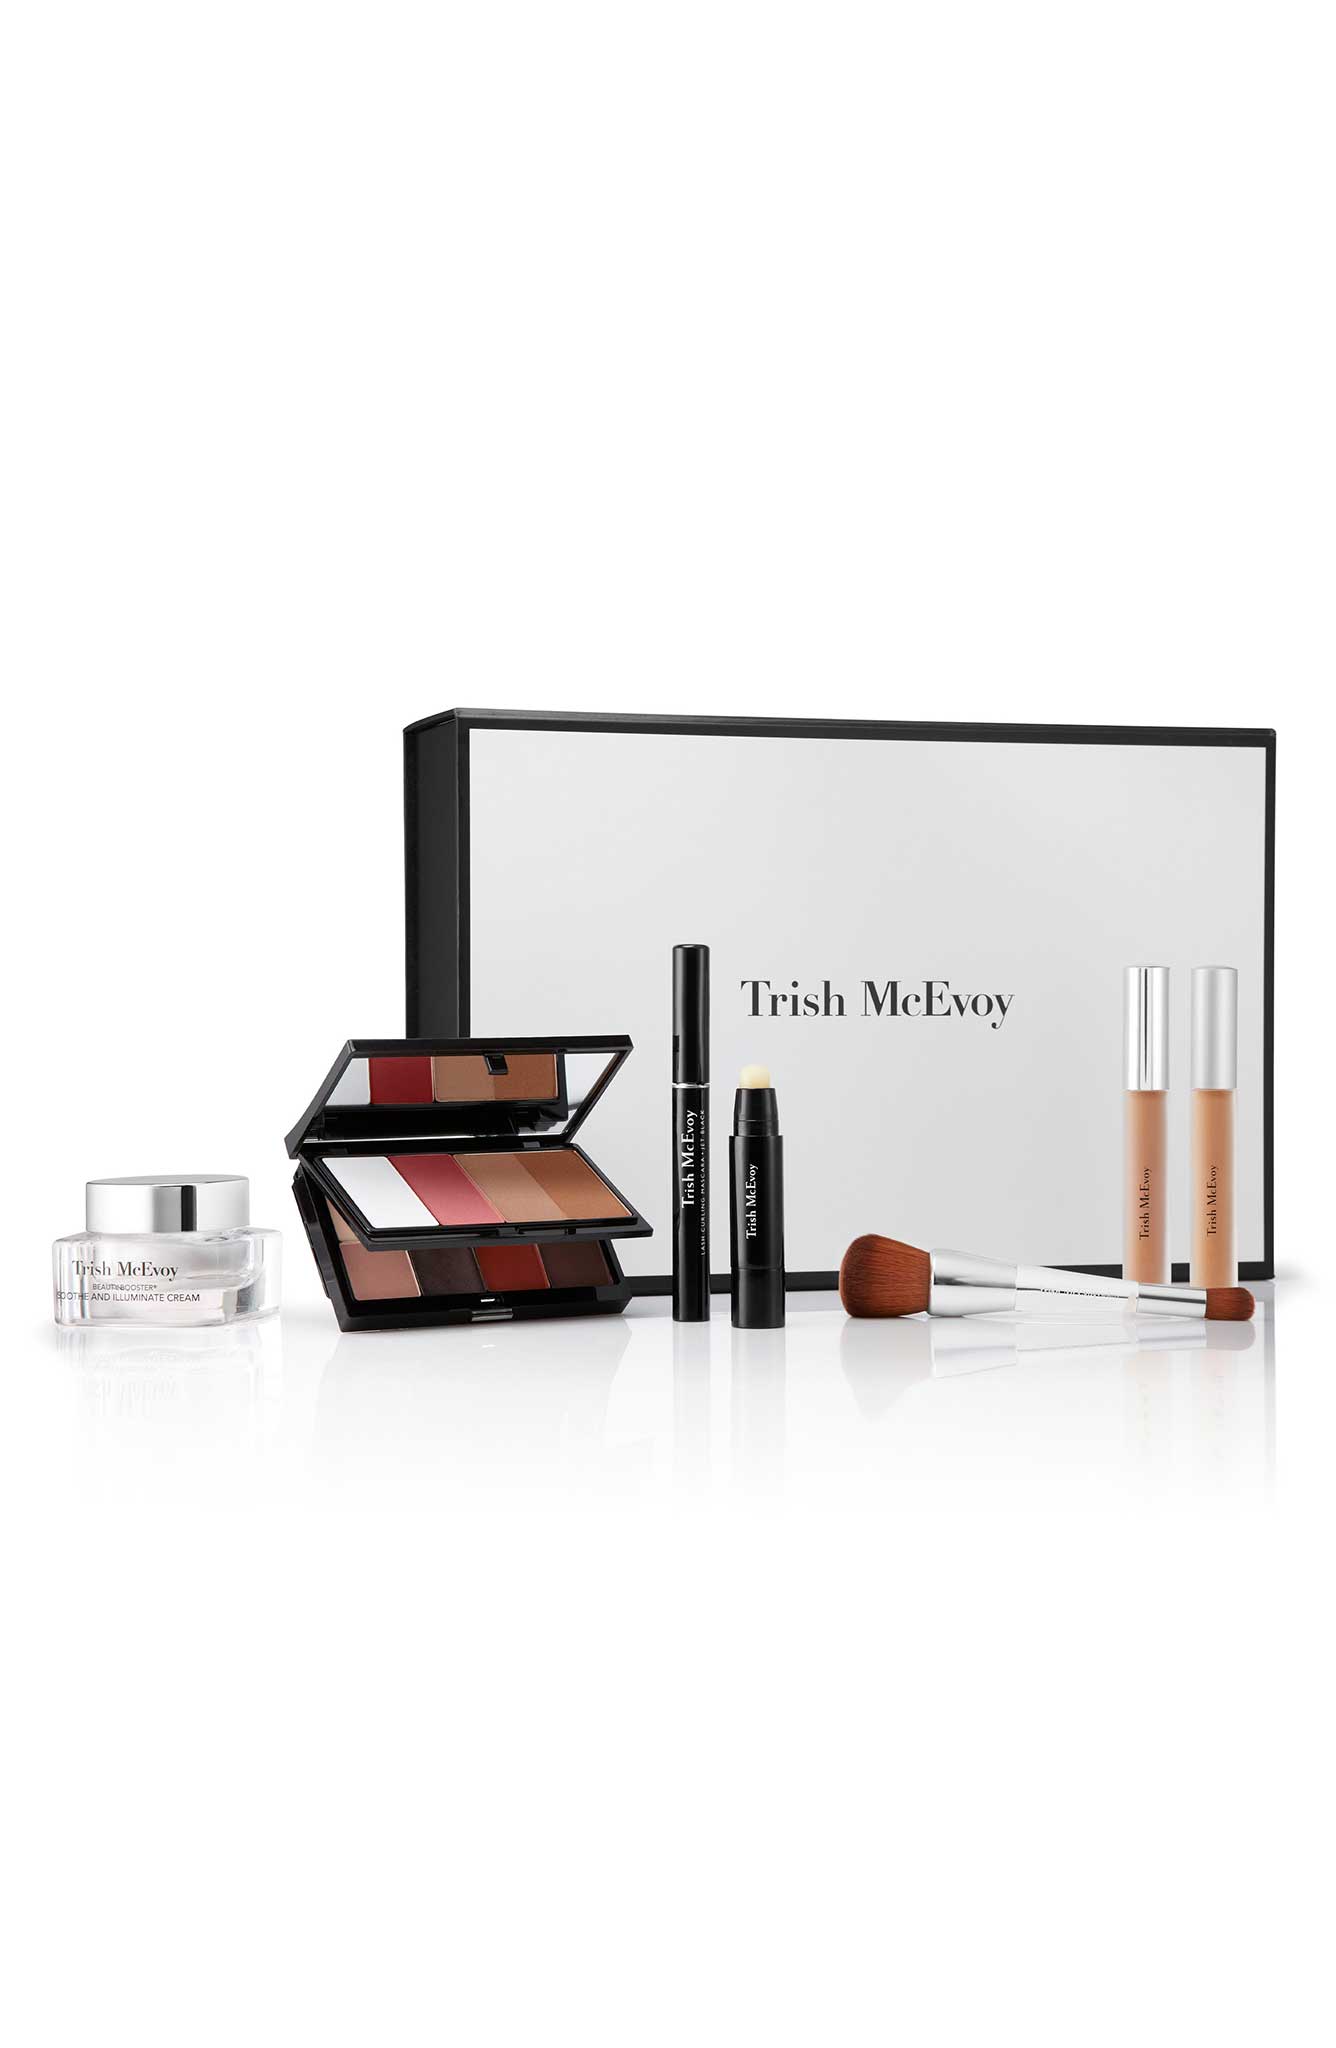 Trish McEvoy Carpe Diem Complete Makeup Kit: This year, Trish curated a makeup wardrobe just for you with an 7-piece full-size makeup kit. These kits come in three different tones so customers can customize their beauty routine in the shade that’s right for them.